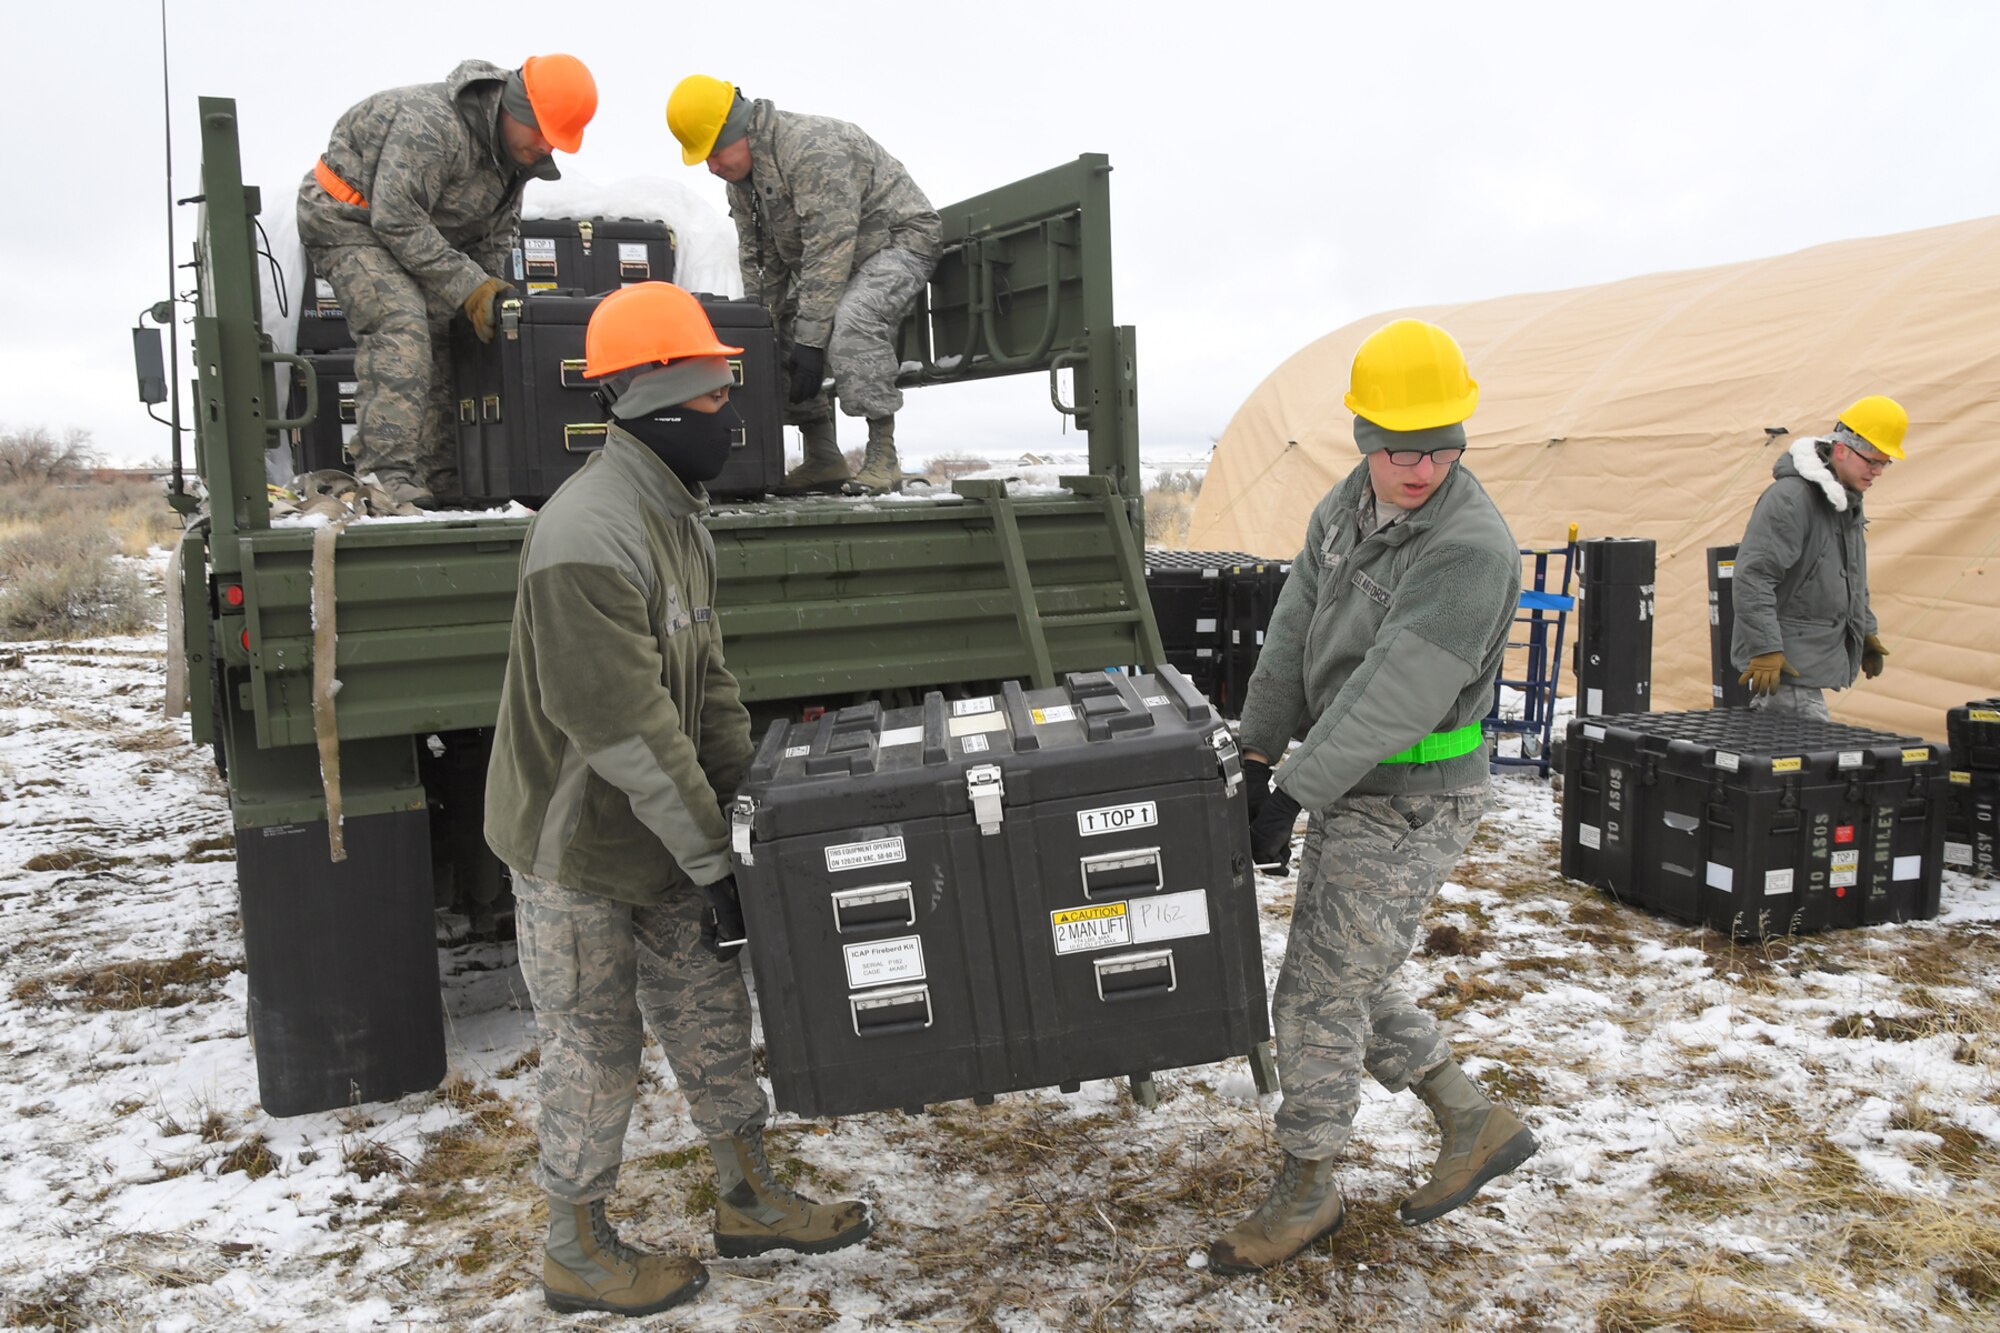 Airmen with the 729th Air Control Squadron unload equipment from vehicles Feb. 5, 2019, during a readiness exercise at Hill Air Force Base, Utah. The evolution was part of an exercise to mobilize and set up a deployed radar location and control reporting center. (U.S. Air Force photo by Todd Cromar)